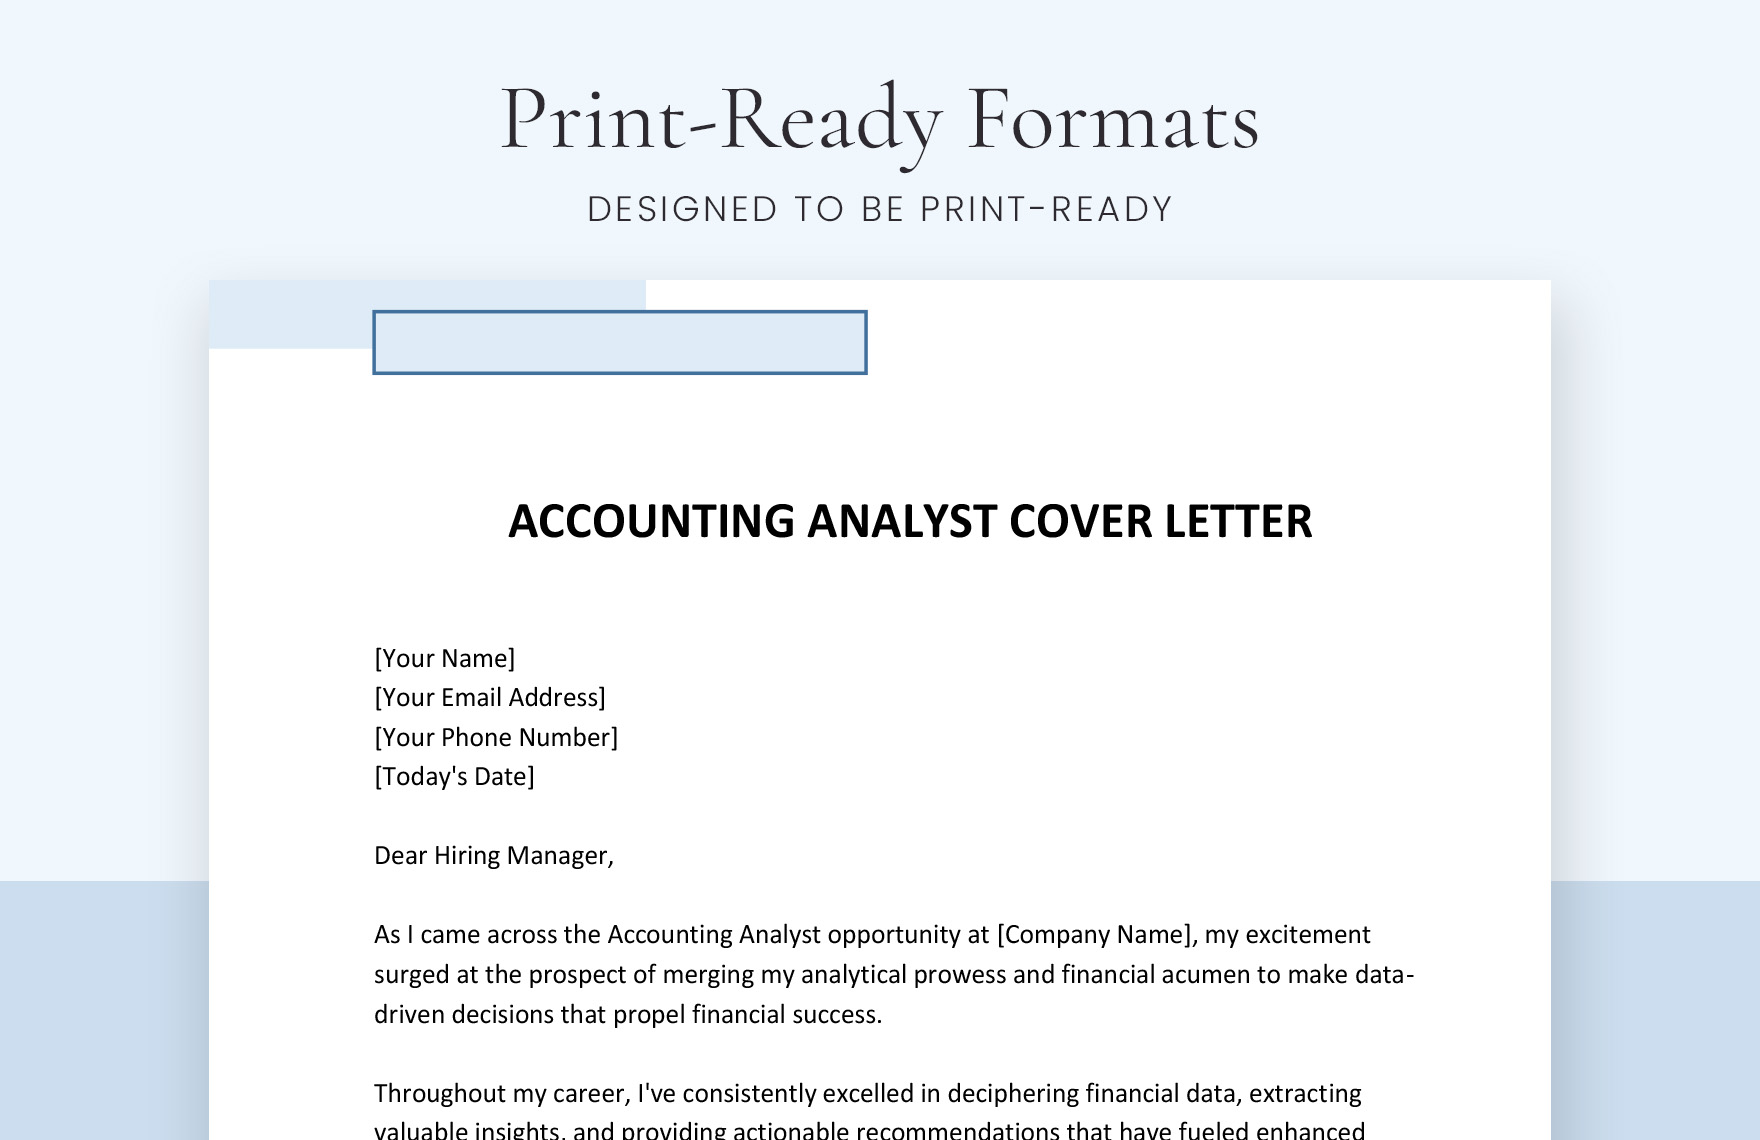 Accounting Analyst Cover Letter